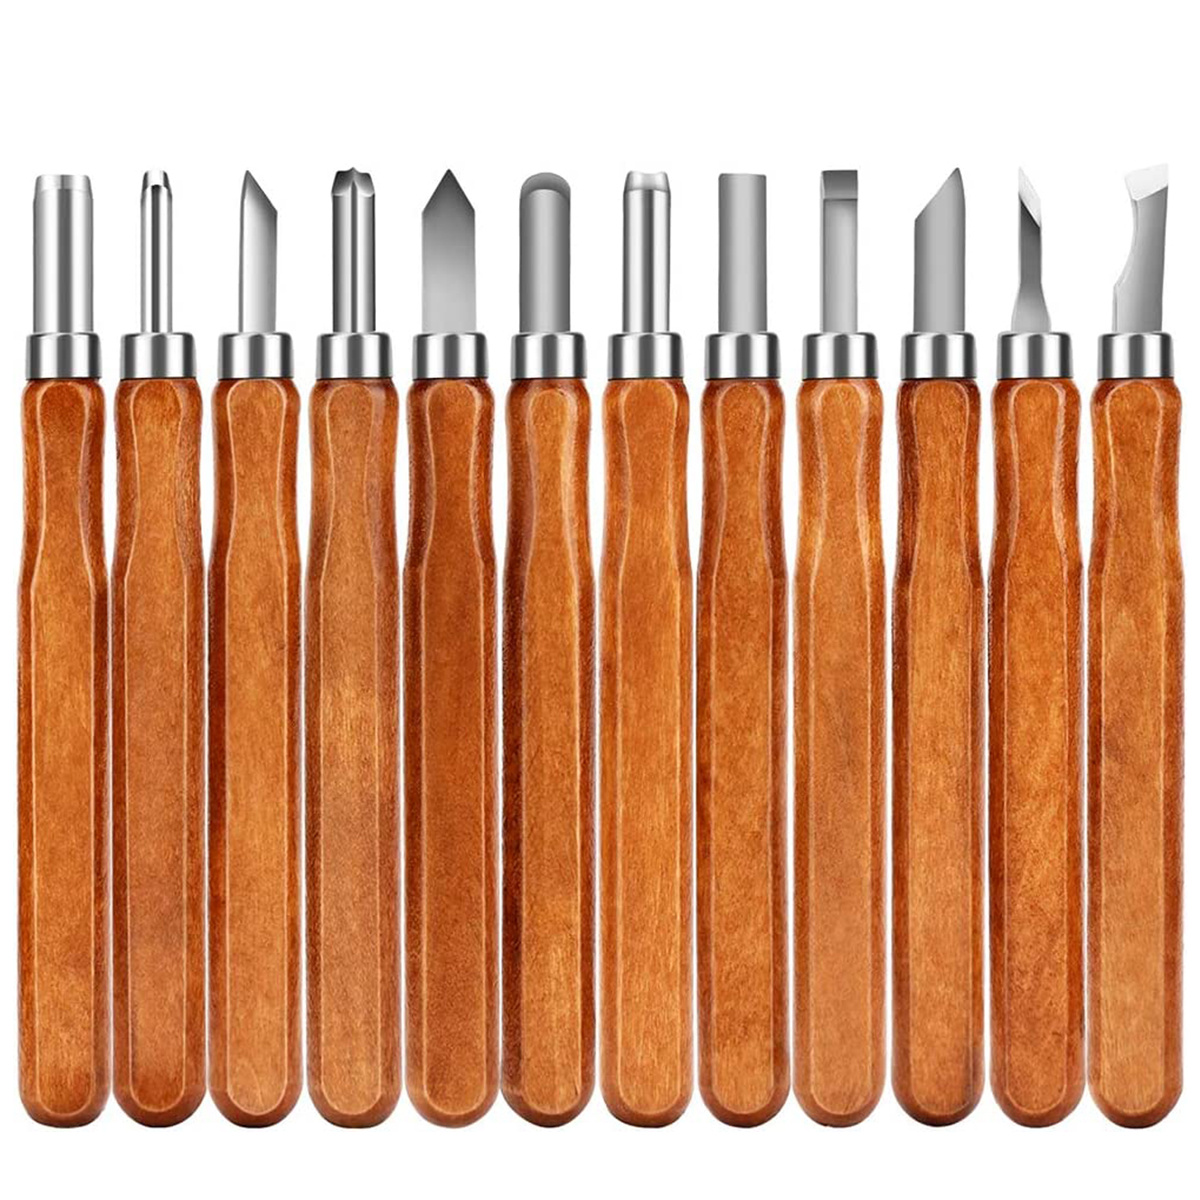 SK2 Carbon Steel 12-Piece Wood Carving Knife Set with Ergonomic Handles Ideal for Sculpting Whittling Crafts Beginners & Professional Woodworkers - All-in-one Kit in a Portable Canvas Bag